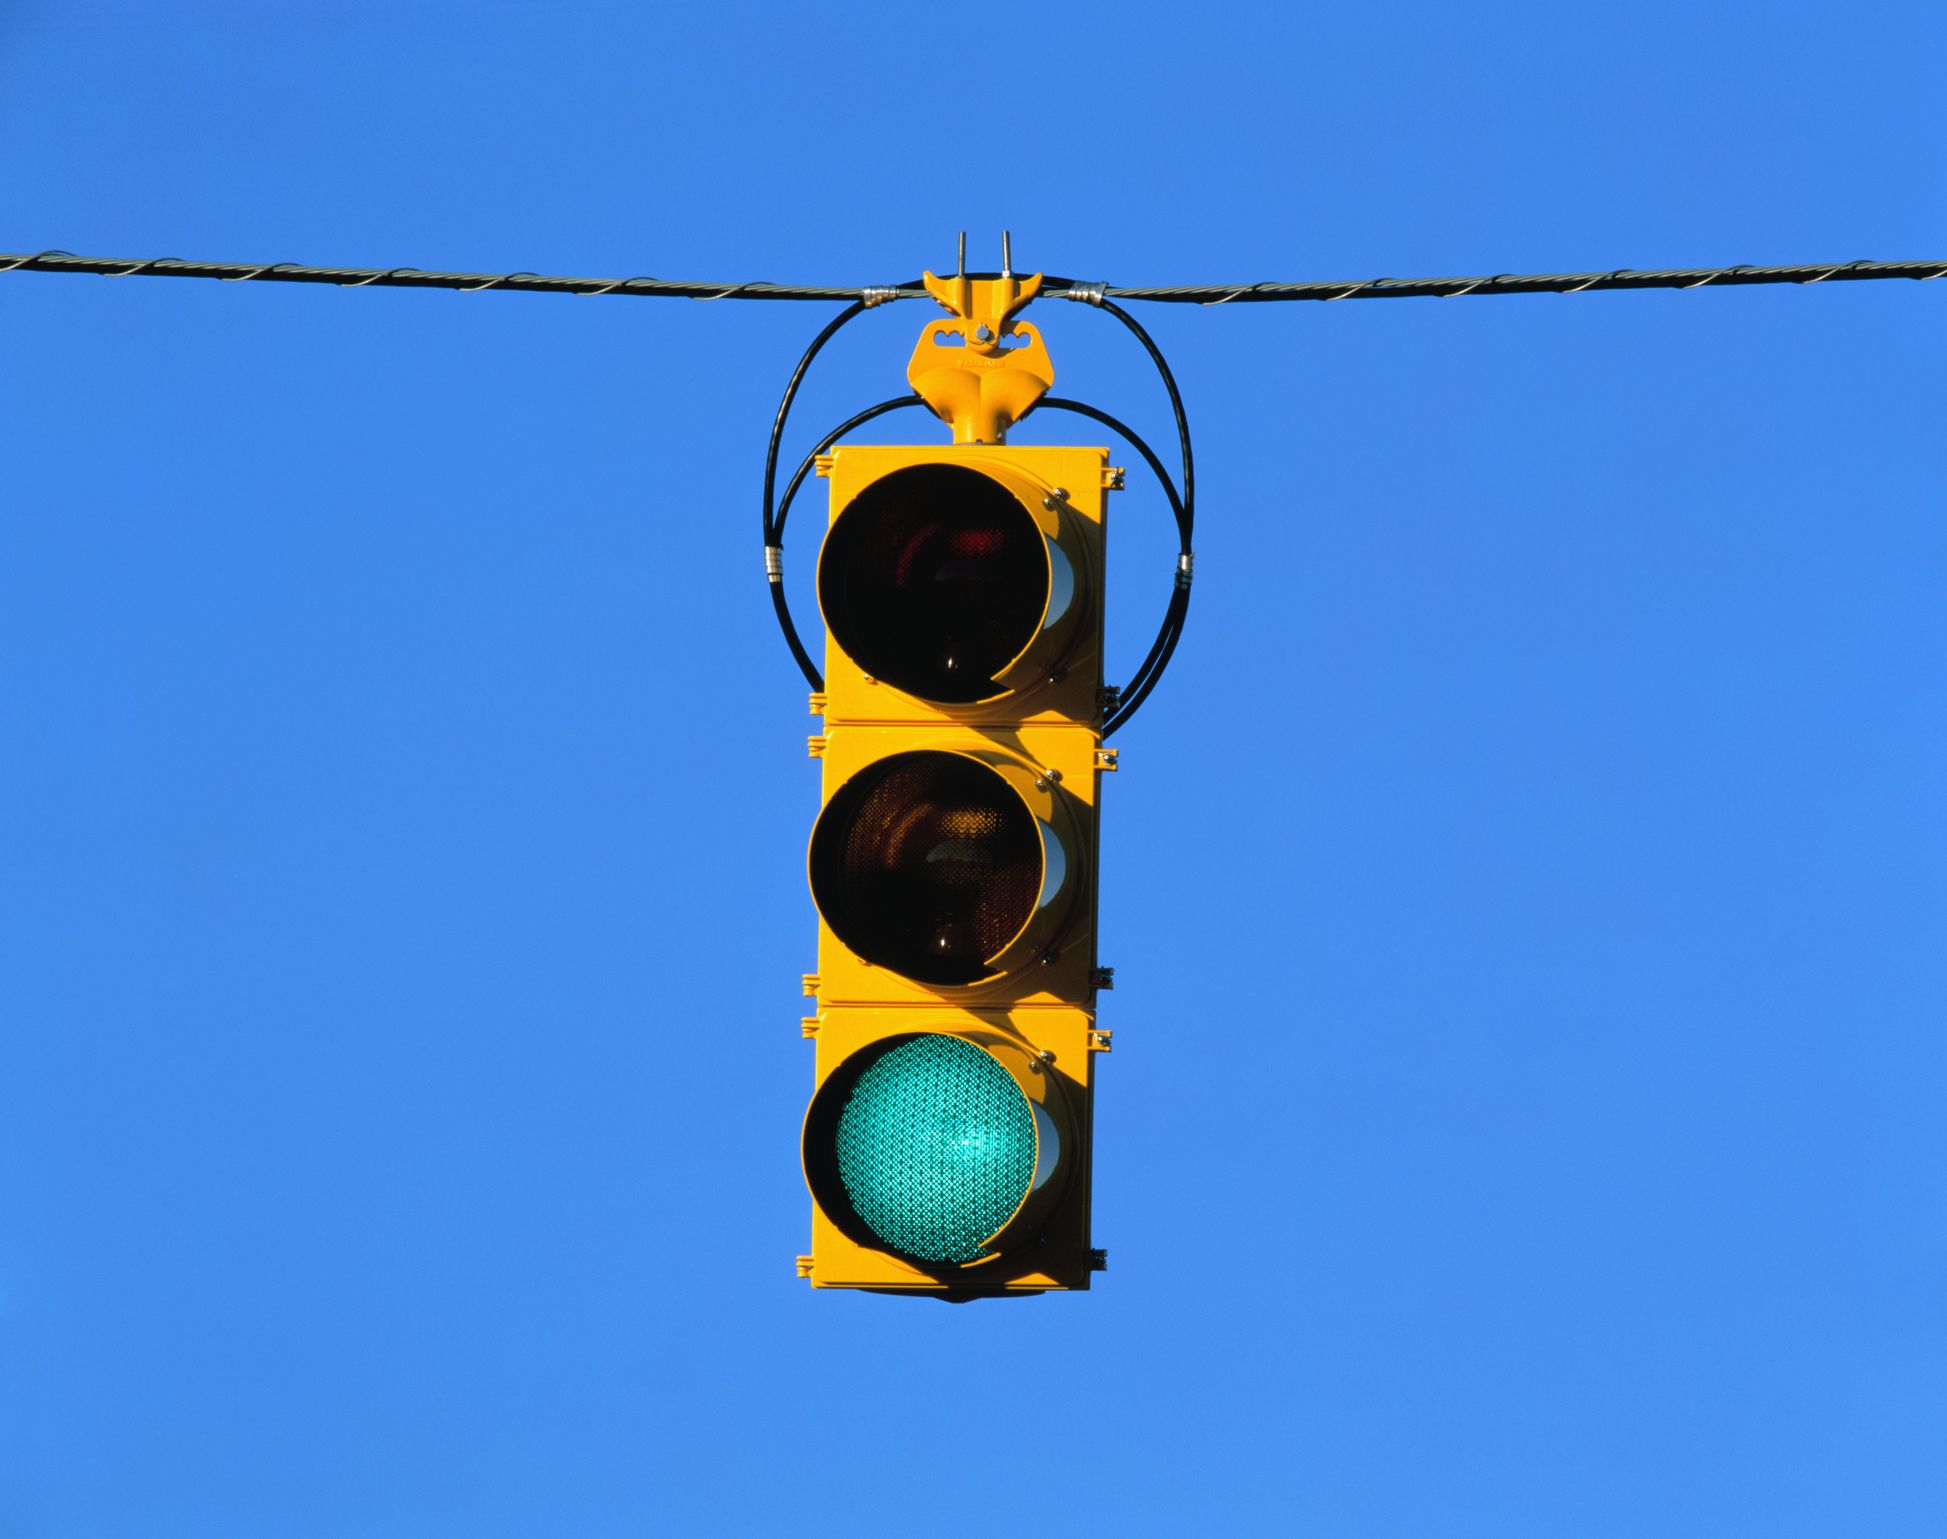 Traffic Lights Need a Fourth Color, Study Says: Here's Why